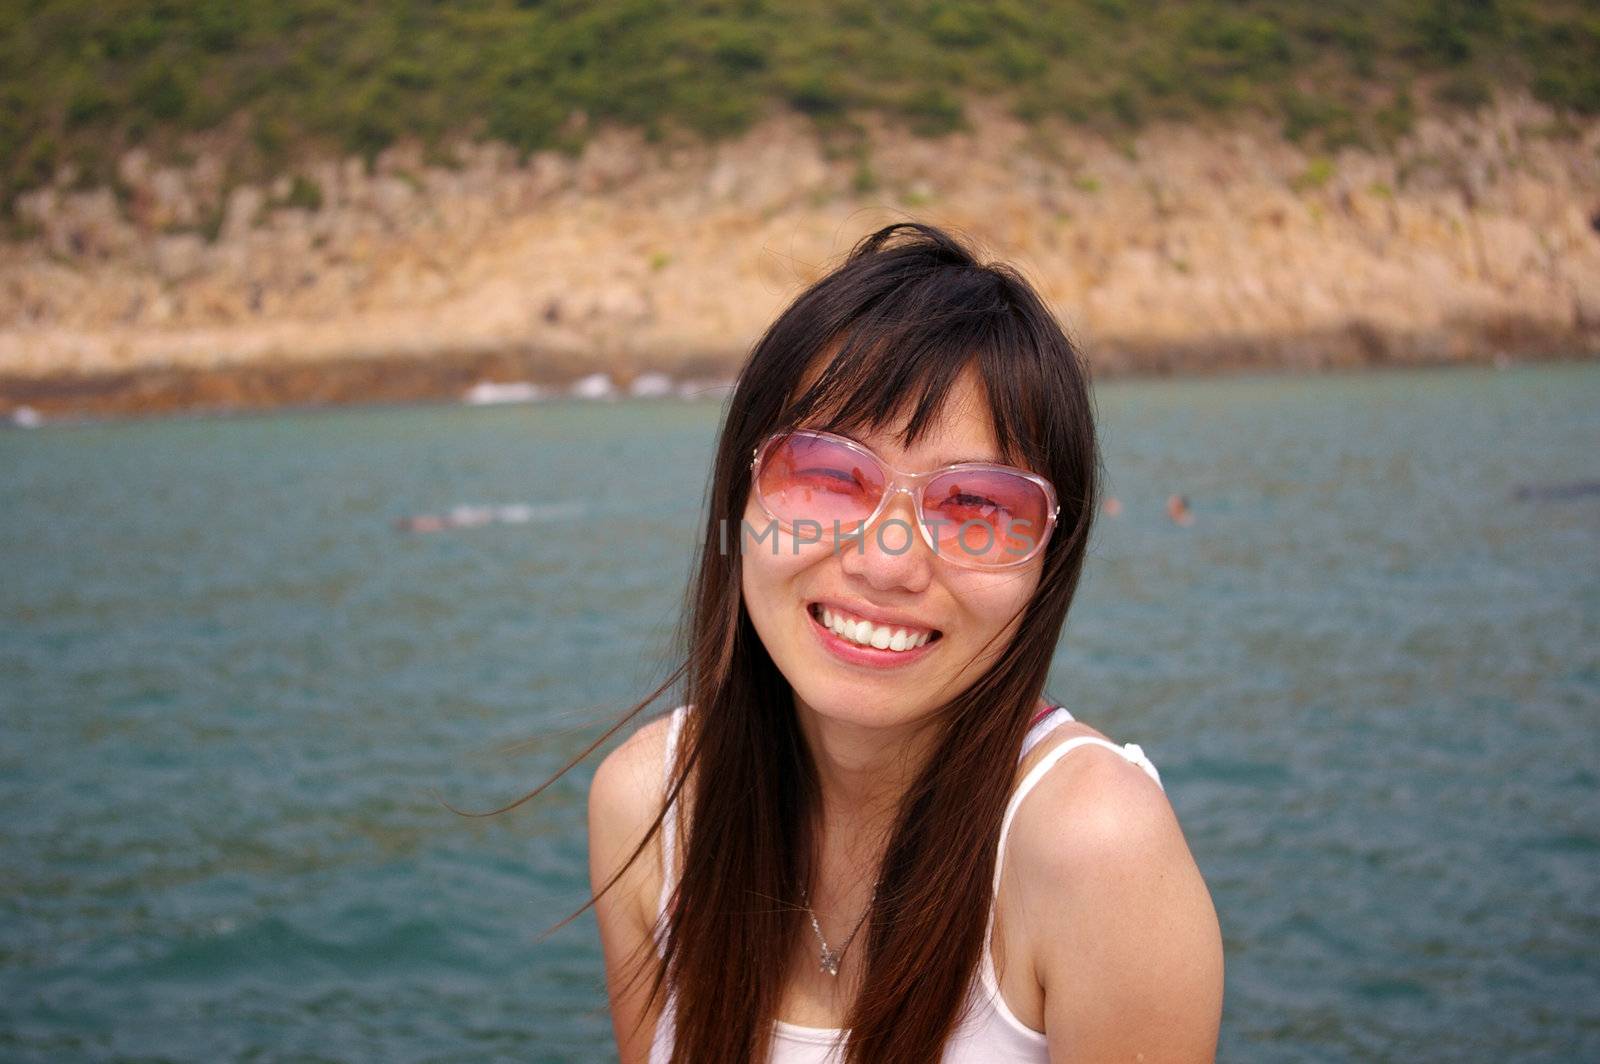 Asian woman smiling with sunglasses in summer